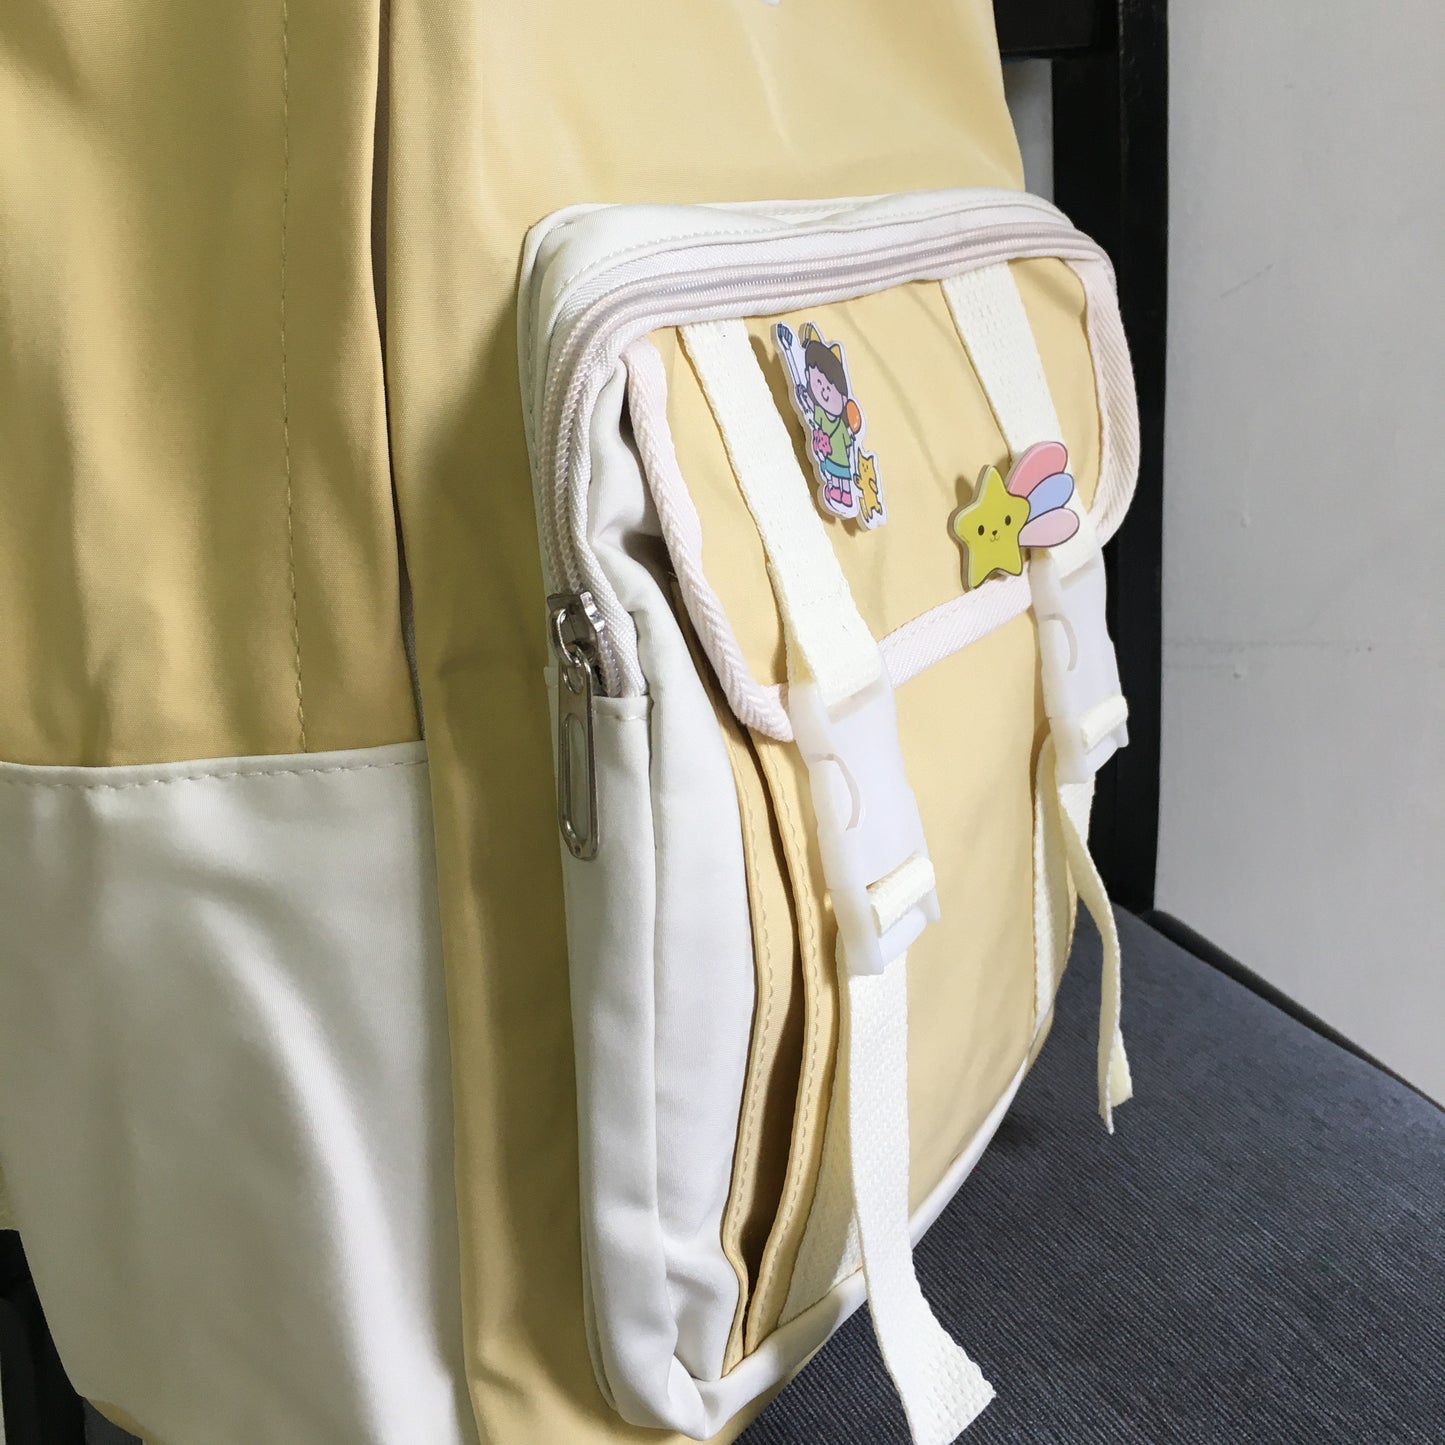 High Quality Korean Style Backpacks D no - 25